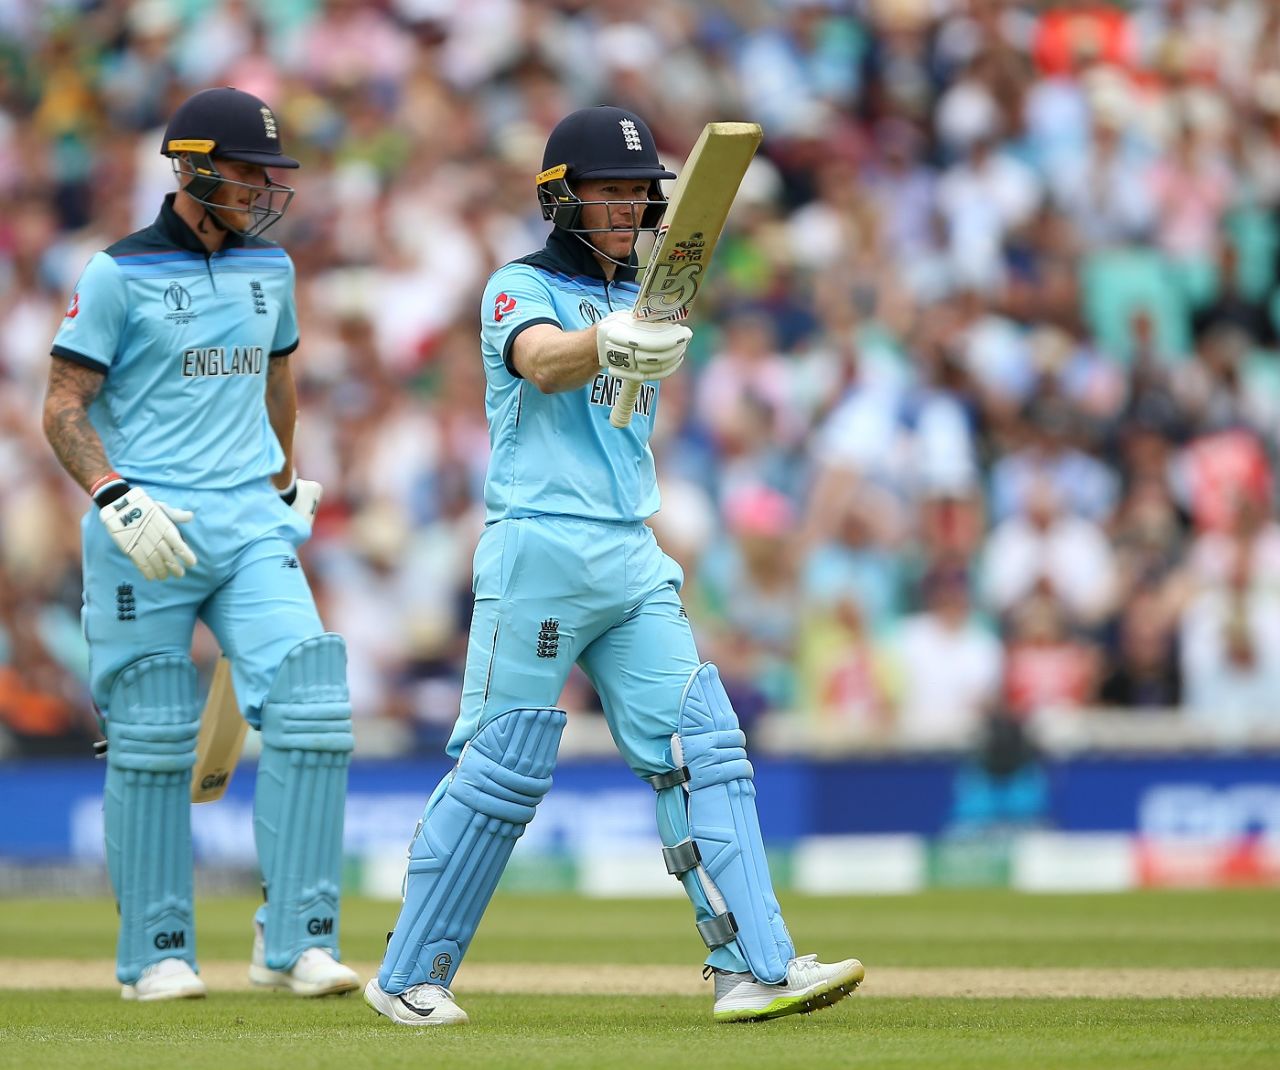 Eoin Morgan celebrates his fifty, England v South Africa, World Cup 2019, The Oval, May 30, 2019